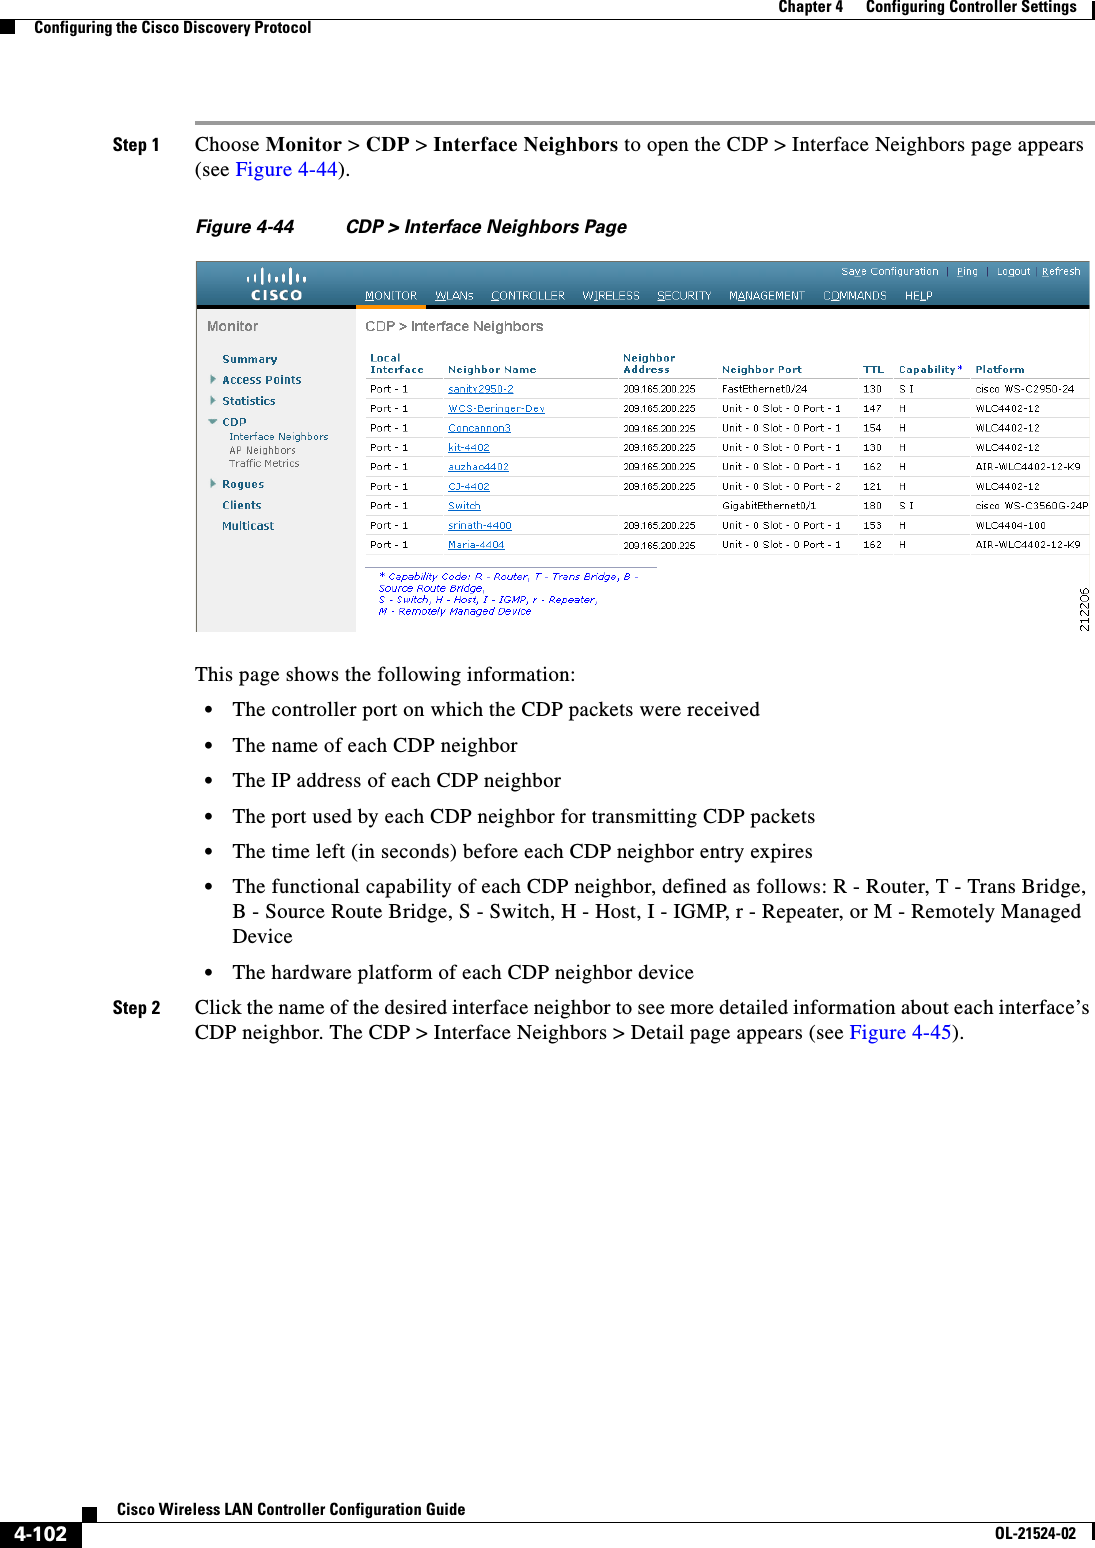  4-102Cisco Wireless LAN Controller Configuration GuideOL-21524-02Chapter 4      Configuring Controller SettingsConfiguring the Cisco Discovery ProtocolStep 1 Choose Monitor &gt; CDP &gt; Interface Neighbors to open the CDP &gt; Interface Neighbors page appears (see Figure 4-44).Figure 4-44 CDP &gt; Interface Neighbors PageThis page shows the following information:  • The controller port on which the CDP packets were received  • The name of each CDP neighbor  • The IP address of each CDP neighbor  • The port used by each CDP neighbor for transmitting CDP packets  • The time left (in seconds) before each CDP neighbor entry expires  • The functional capability of each CDP neighbor, defined as follows: R - Router, T - Trans Bridge, B - Source Route Bridge, S - Switch, H - Host, I - IGMP, r - Repeater, or M - Remotely Managed Device  • The hardware platform of each CDP neighbor deviceStep 2 Click the name of the desired interface neighbor to see more detailed information about each interface’s CDP neighbor. The CDP &gt; Interface Neighbors &gt; Detail page appears (see Figure 4-45).